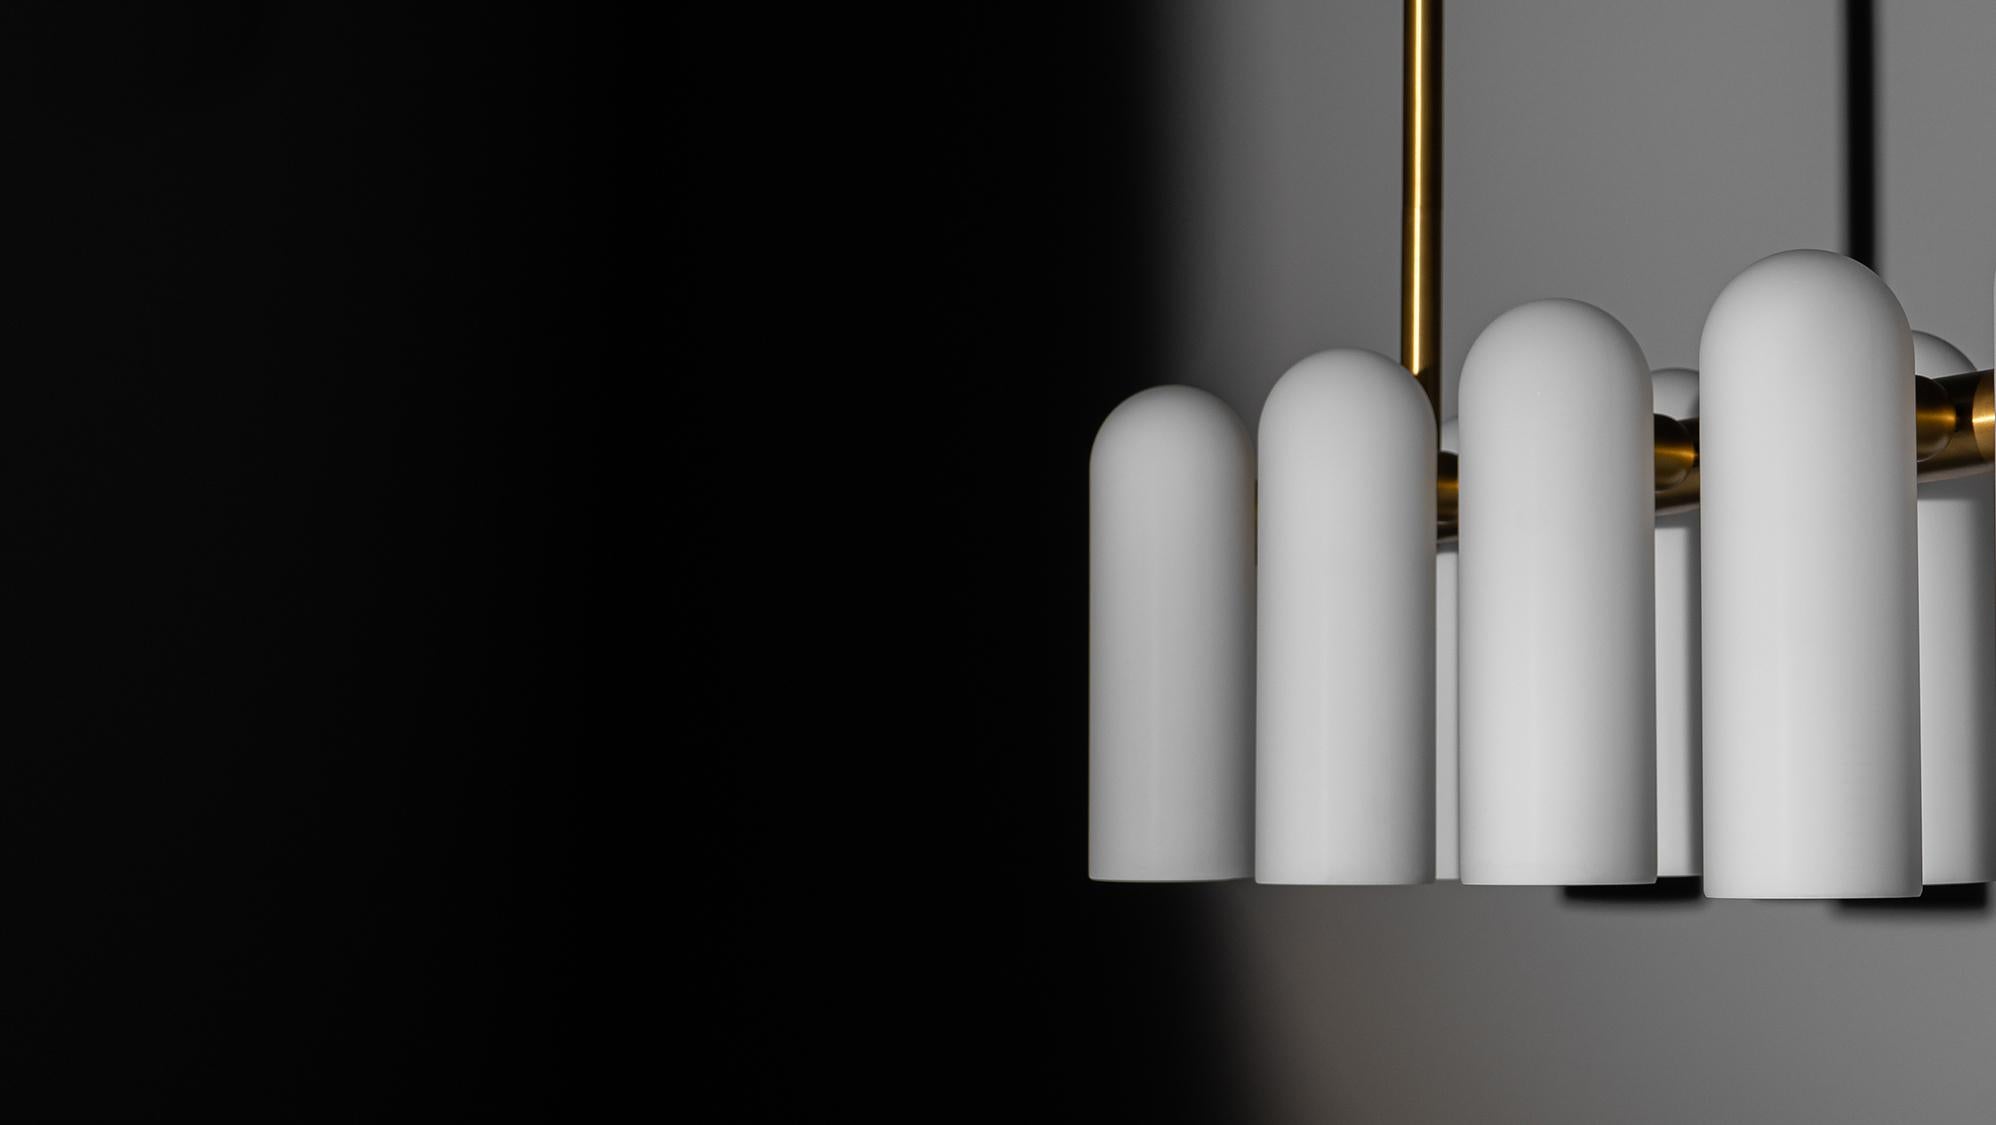 A colonnade of light sources. This delicate engine of frosted glass generates a luminous environment while contrasting brass elements create a sense of stability.

Available in our three signature finishes: Lacquered Burnished Brass (LBB); Black